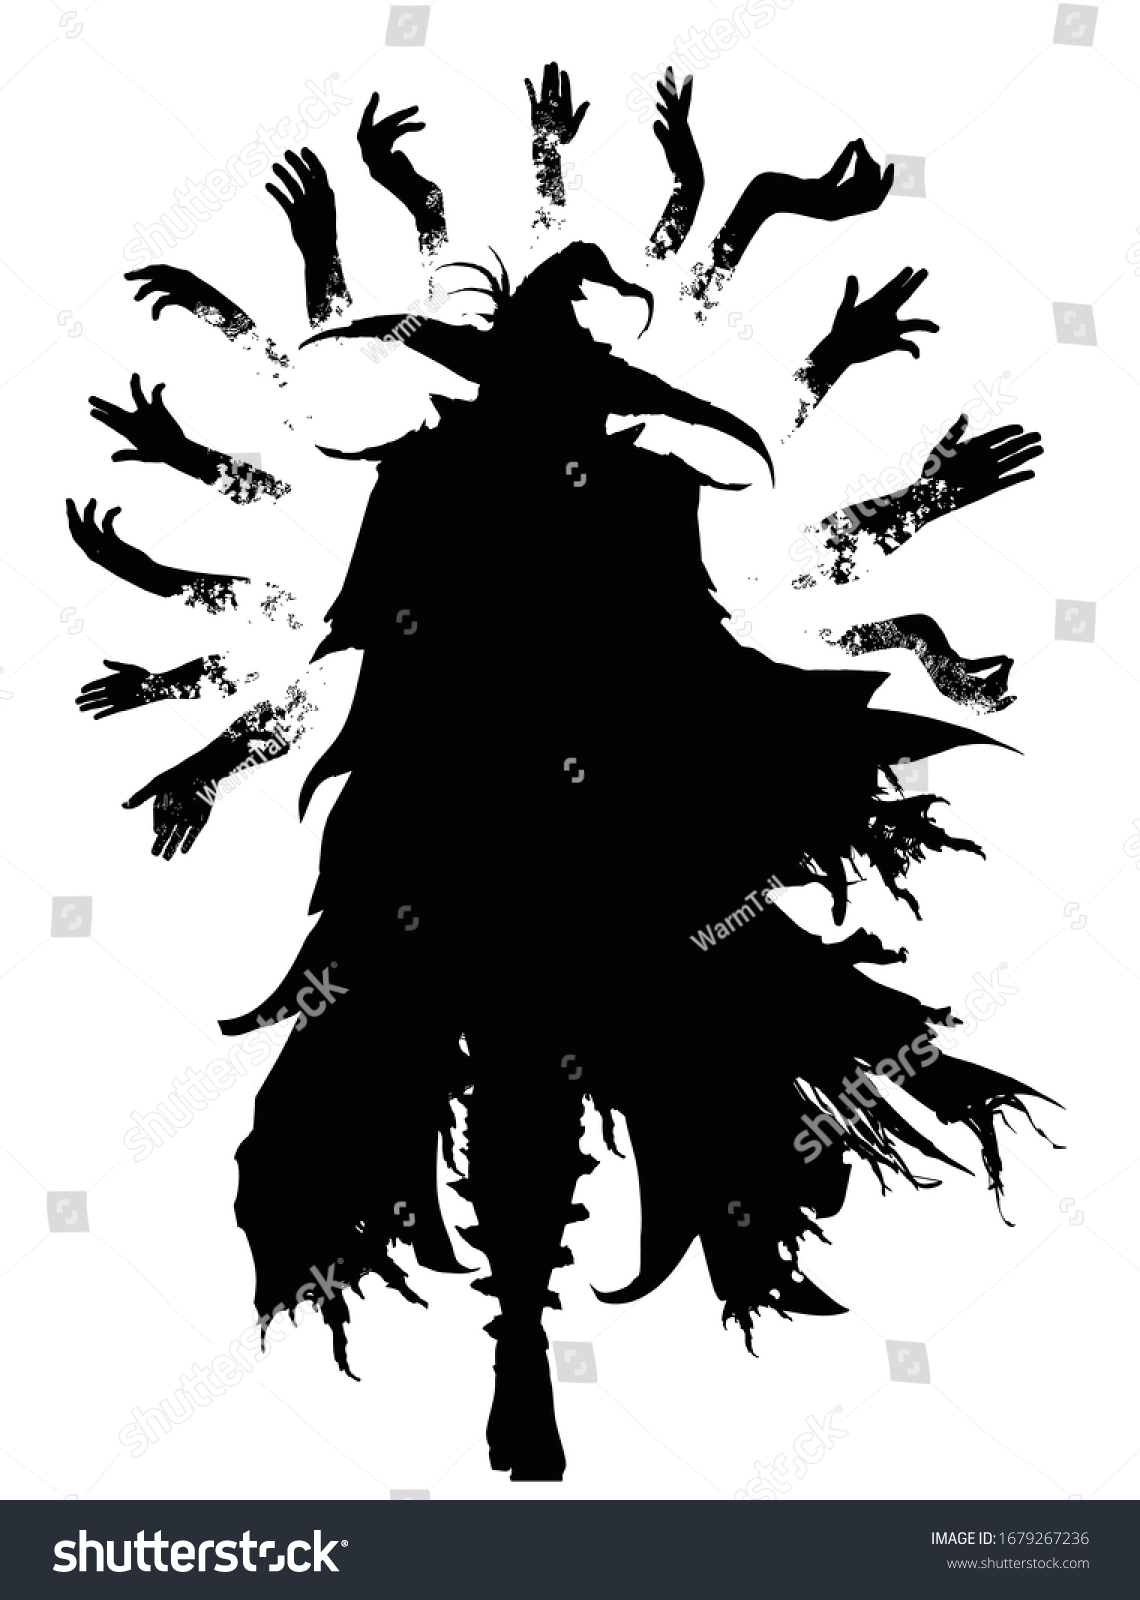 SVG of The black silhouette of a wizard in an acute-angled hat and a torn cloak, surrounded by magical hands flying in the air, he gracefully goes forward towards the viewer. 2d illustration svg